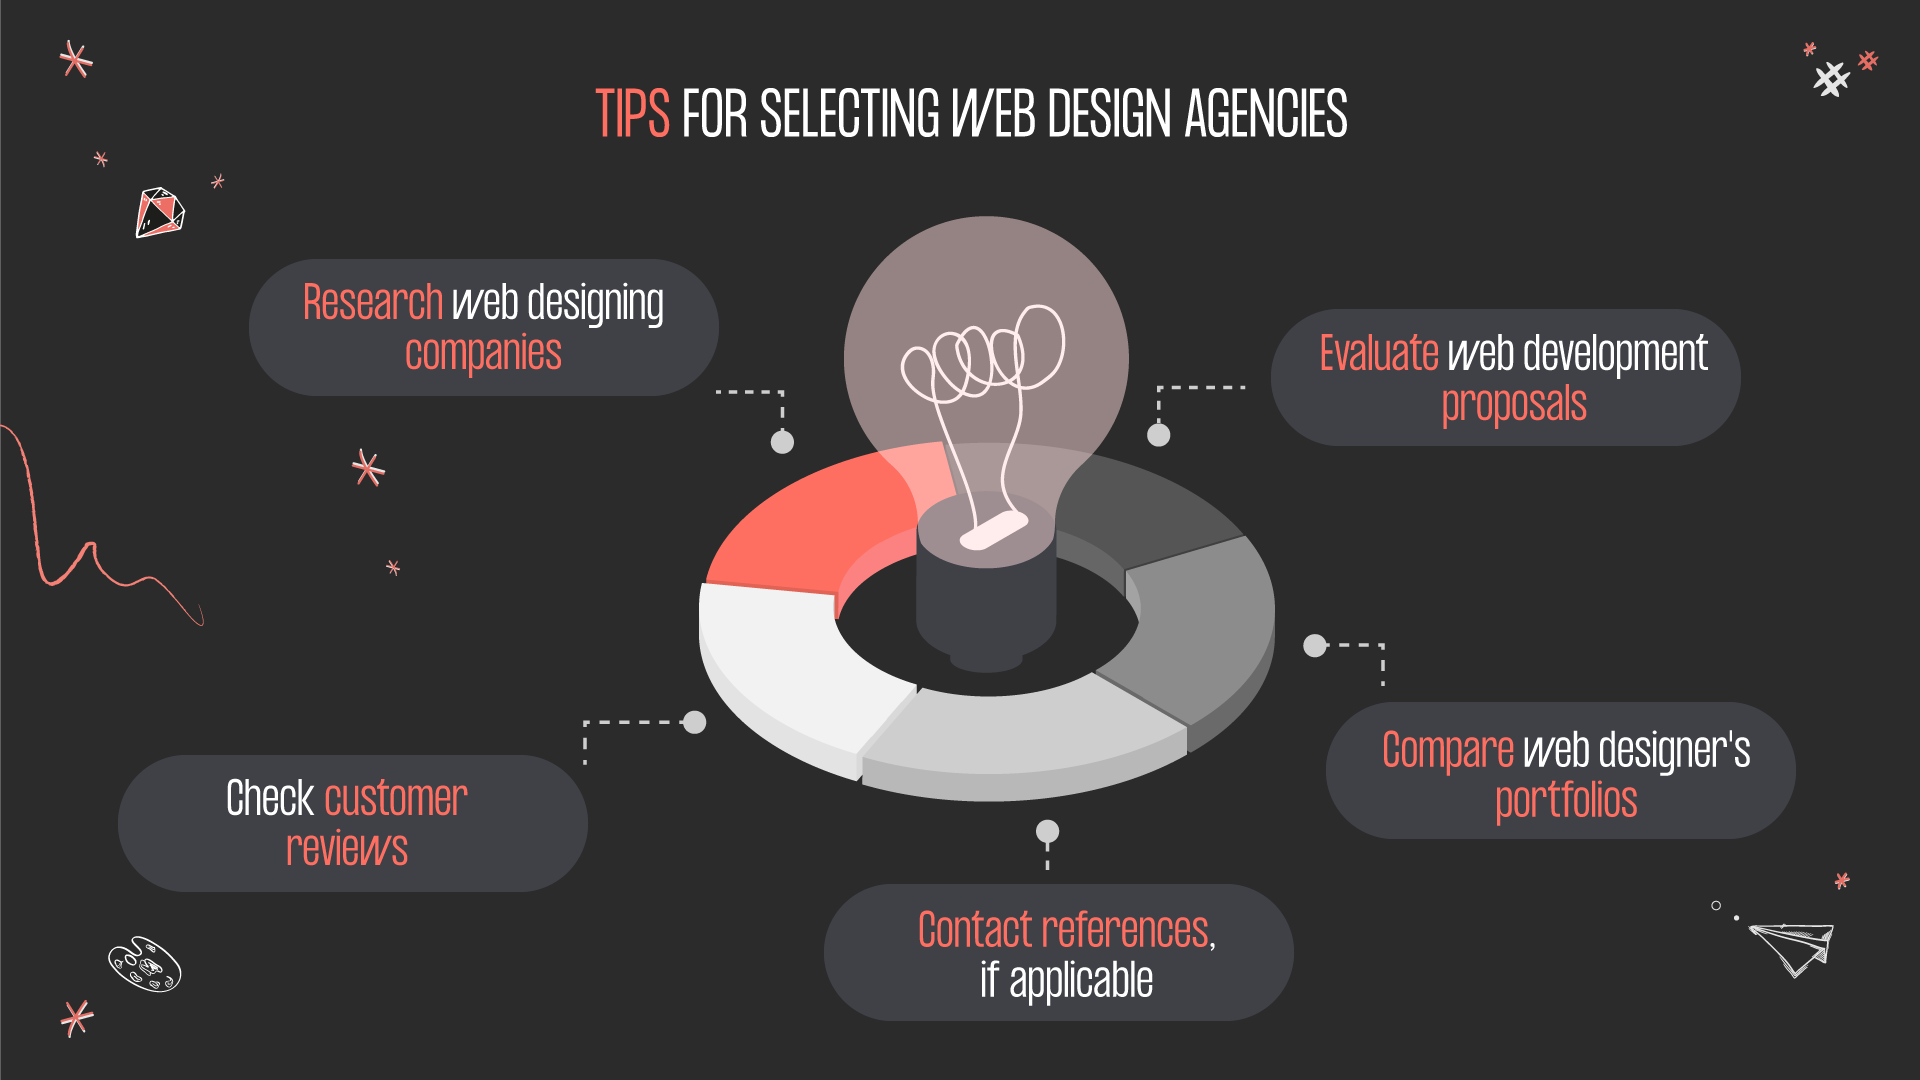 Tips for selecting web design agencies